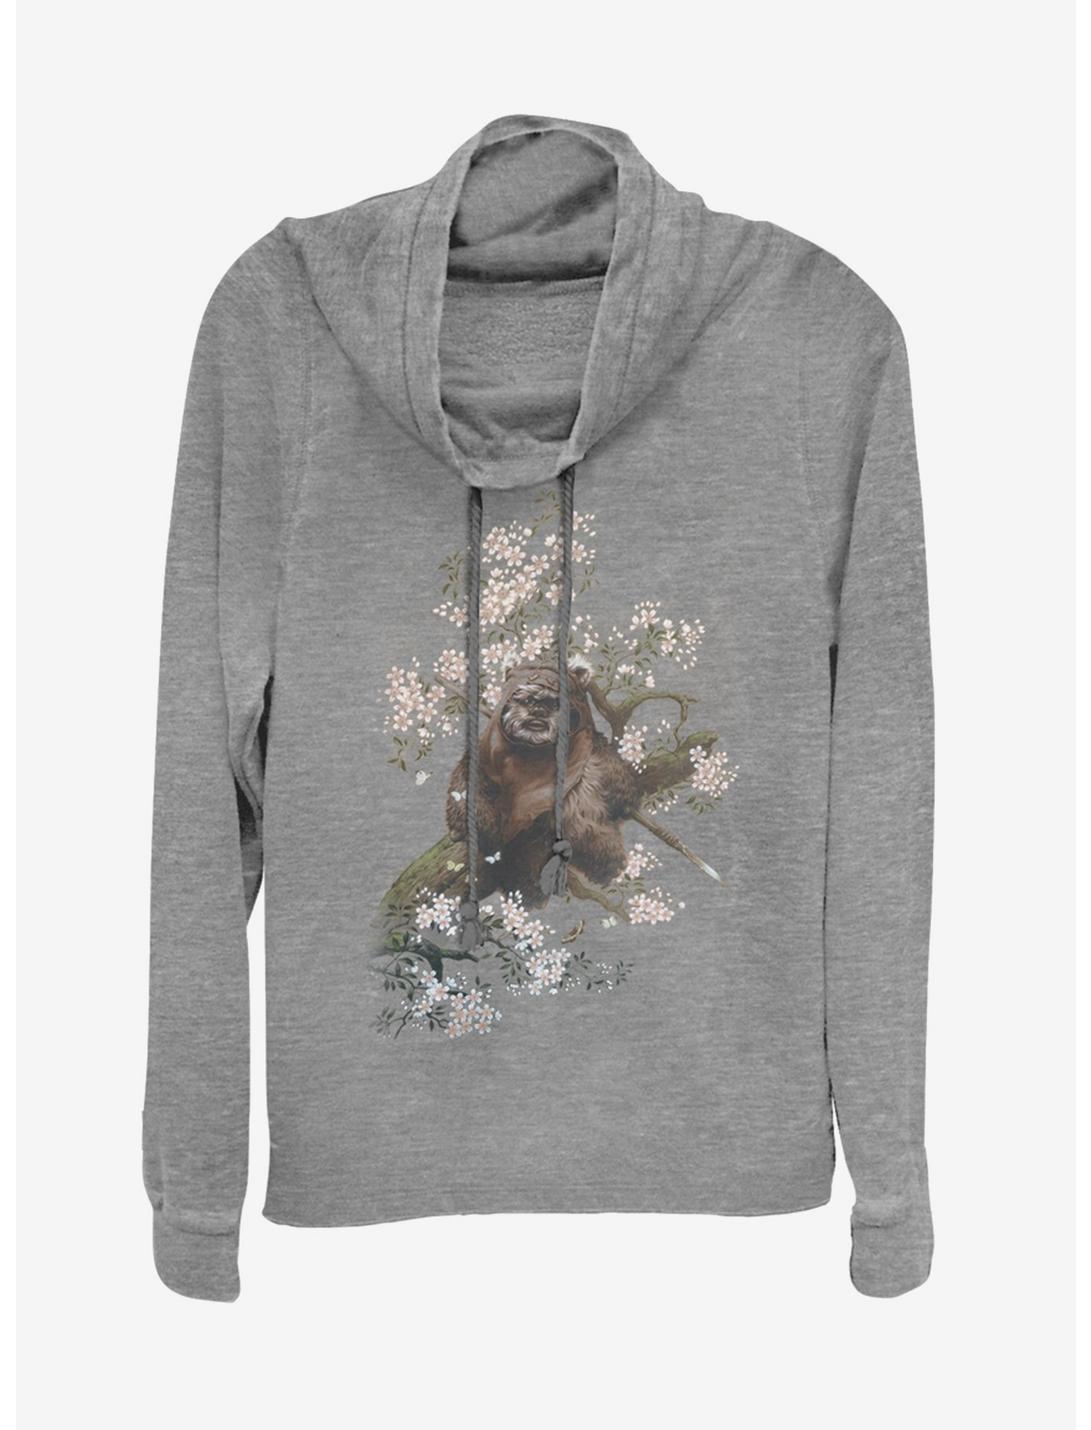 Star Wars Ewok in the Flowers Cowlneck Long-Sleeve Womens Top, GRAY HTR, hi-res